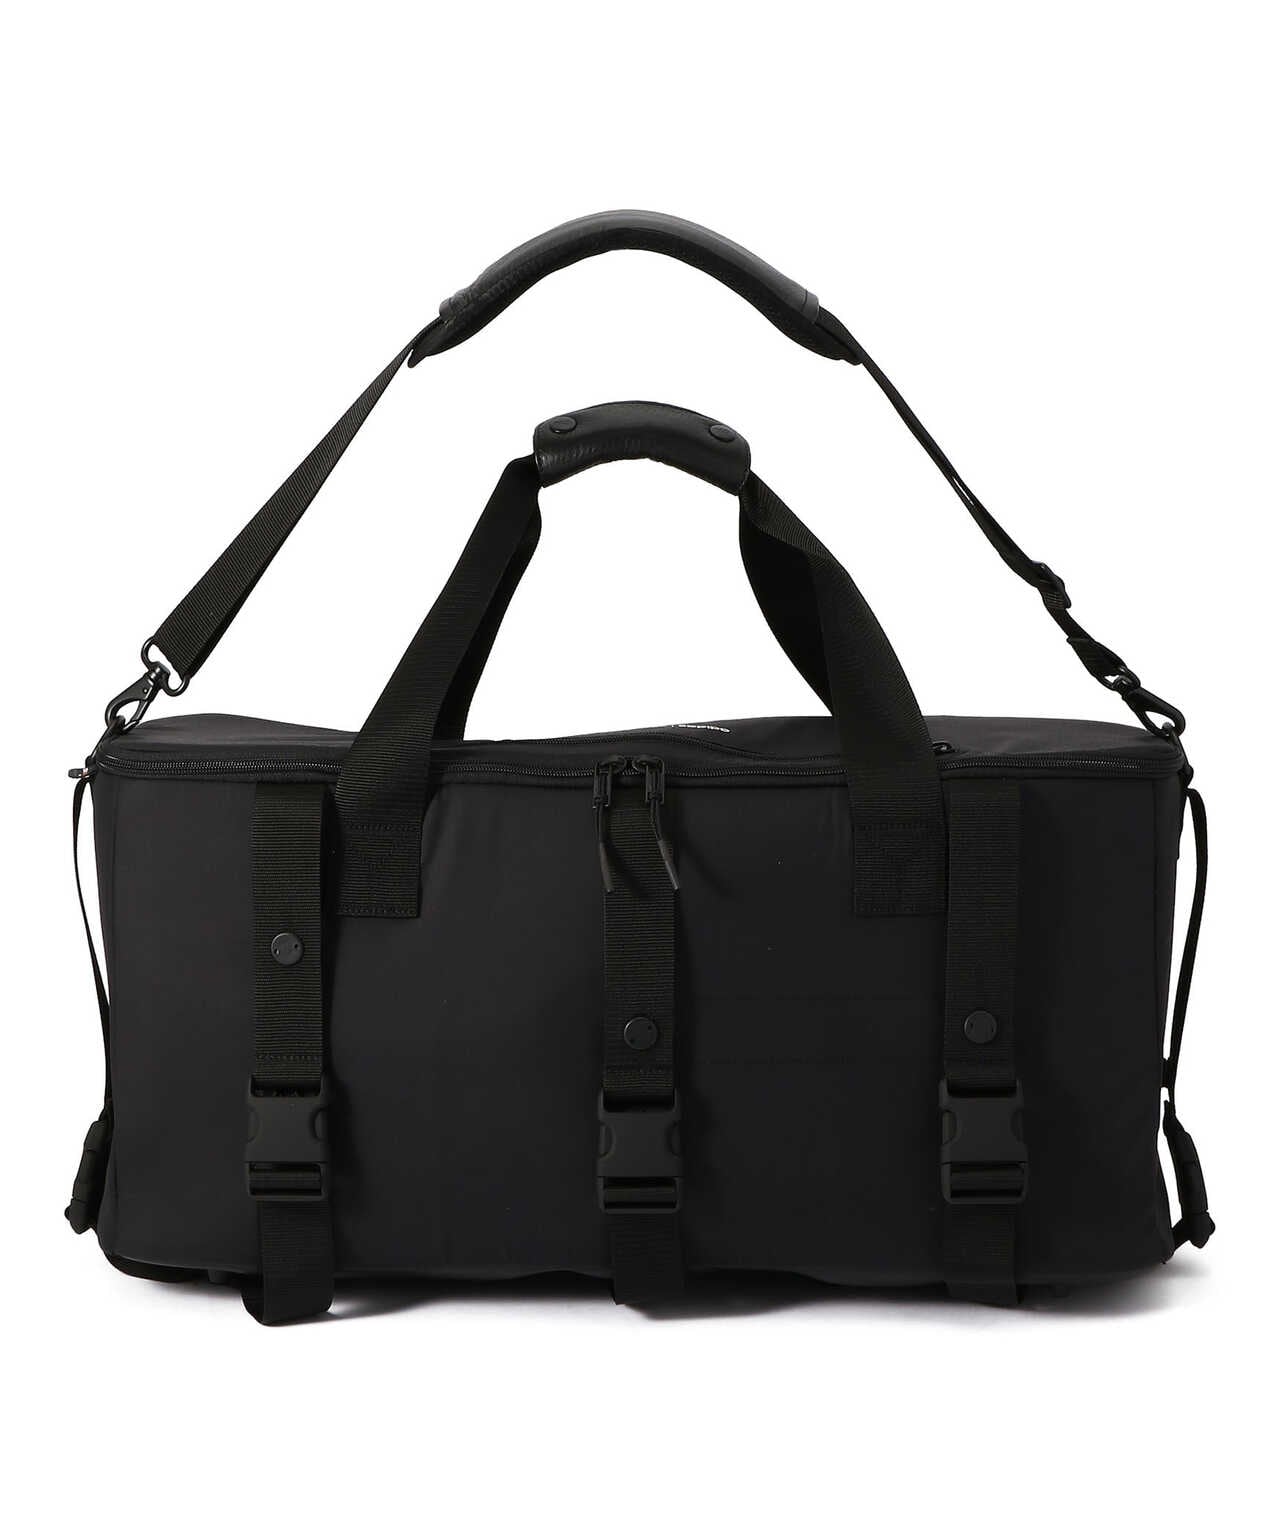 Y-3/ワイスリー/MOBILE ARCHIVE HOLDALL/バッグ | LHP